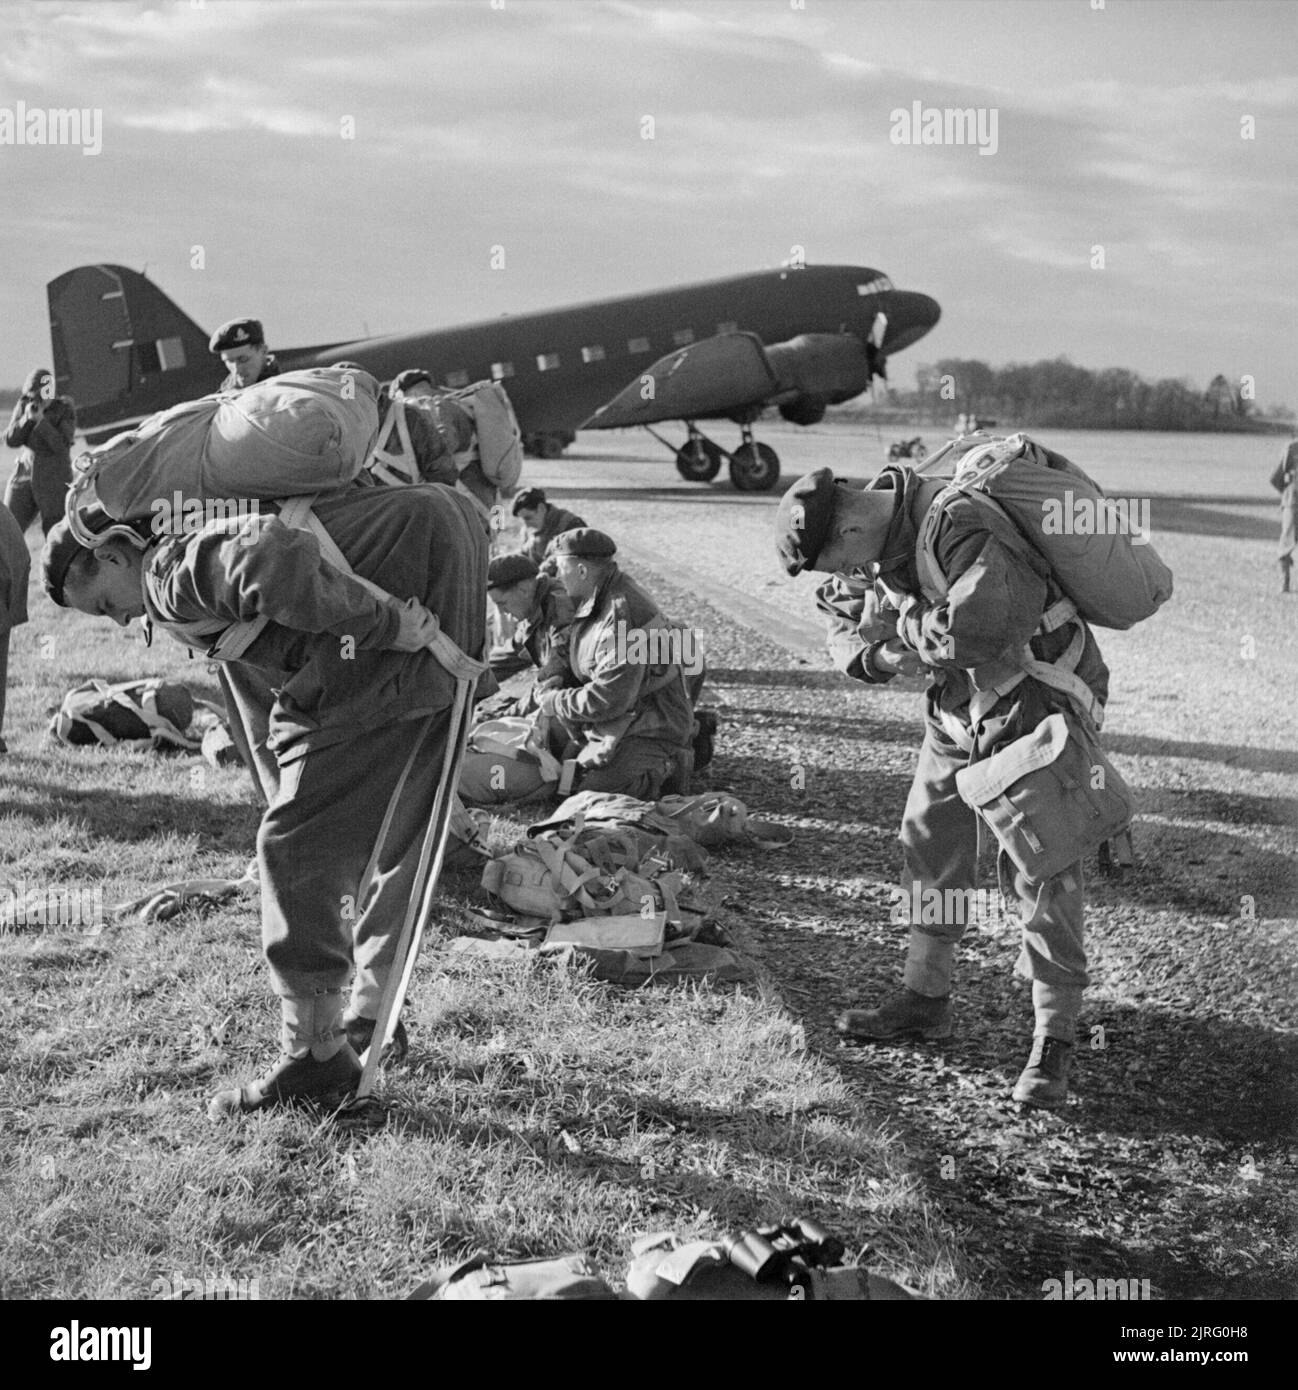 British paratroops fitting their parachute harnesses before entering a Dakota during a large-scale airborne forces exercise, 22 April 1944. Paratroopers fitting their parachute harnesses before entering a Dakota during a large-scale airborne forces exercise, 22 April 1944. Stock Photo